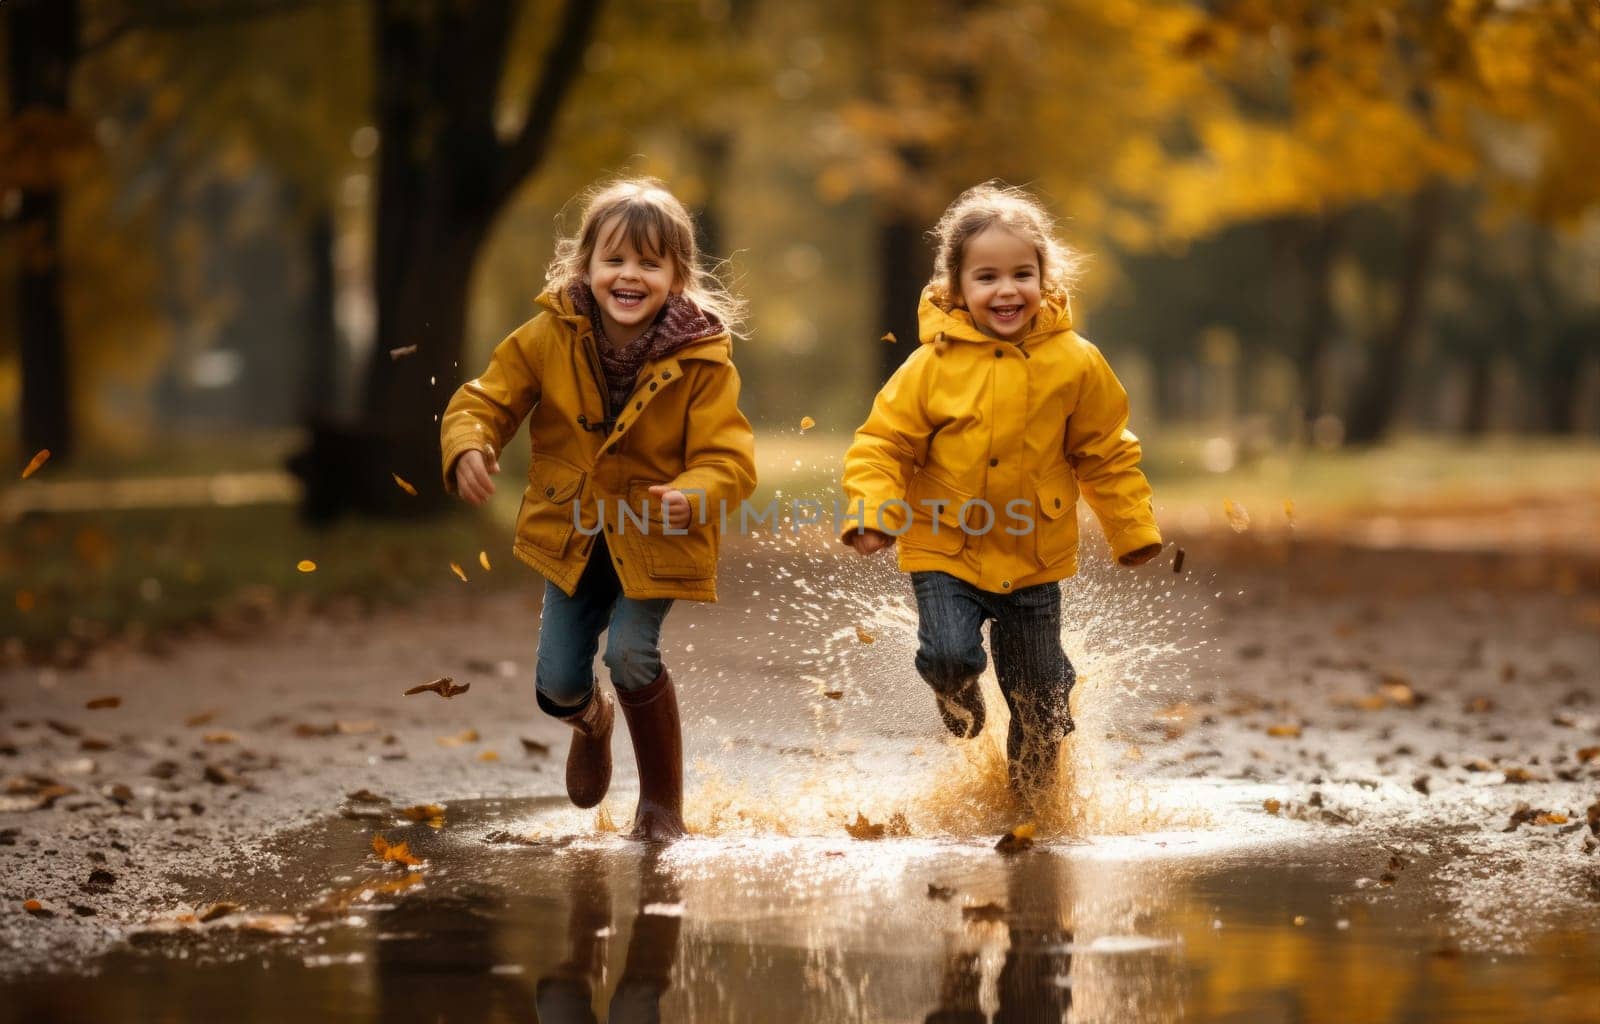 Against the backdrop of a rainy autumn day, two adorable little girls joyfully dash through puddles, their laughter echoing the pure delight of carefree childhood adventures.Generated image.